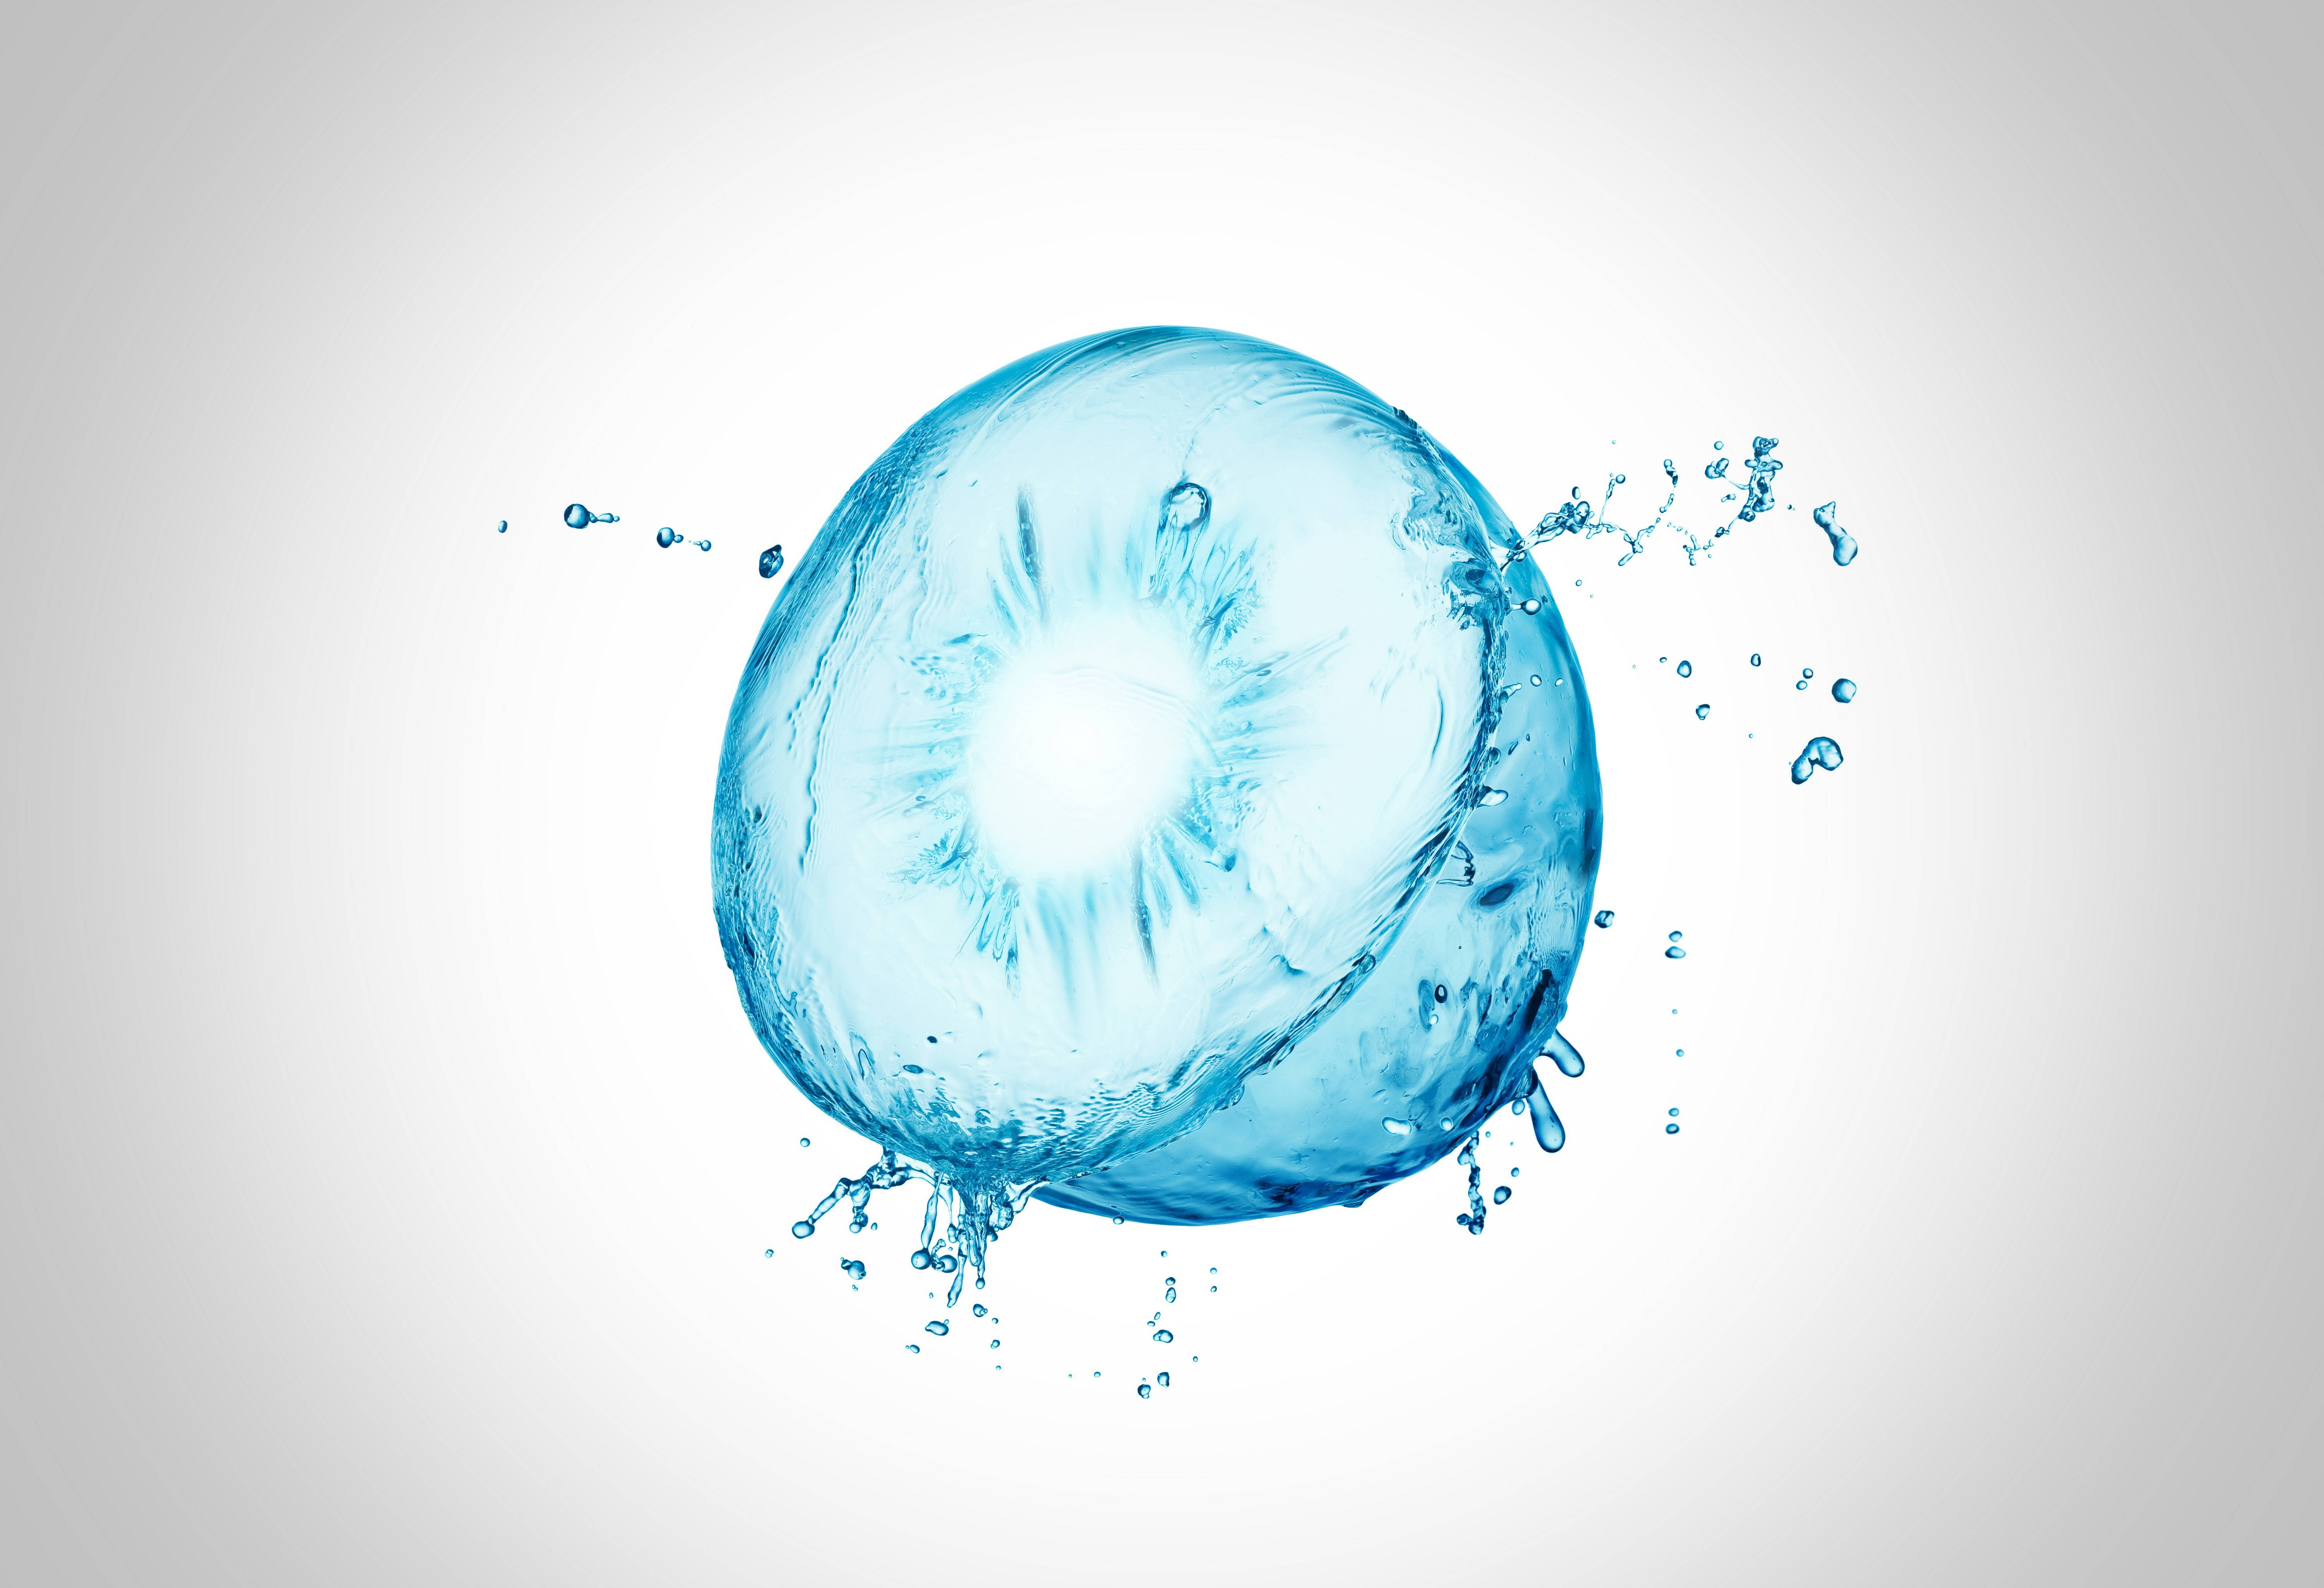 An Abstract Photo Render Of A Halved Kiwi Fruit Turned Into A Clear Blue Liquid Against A White Background